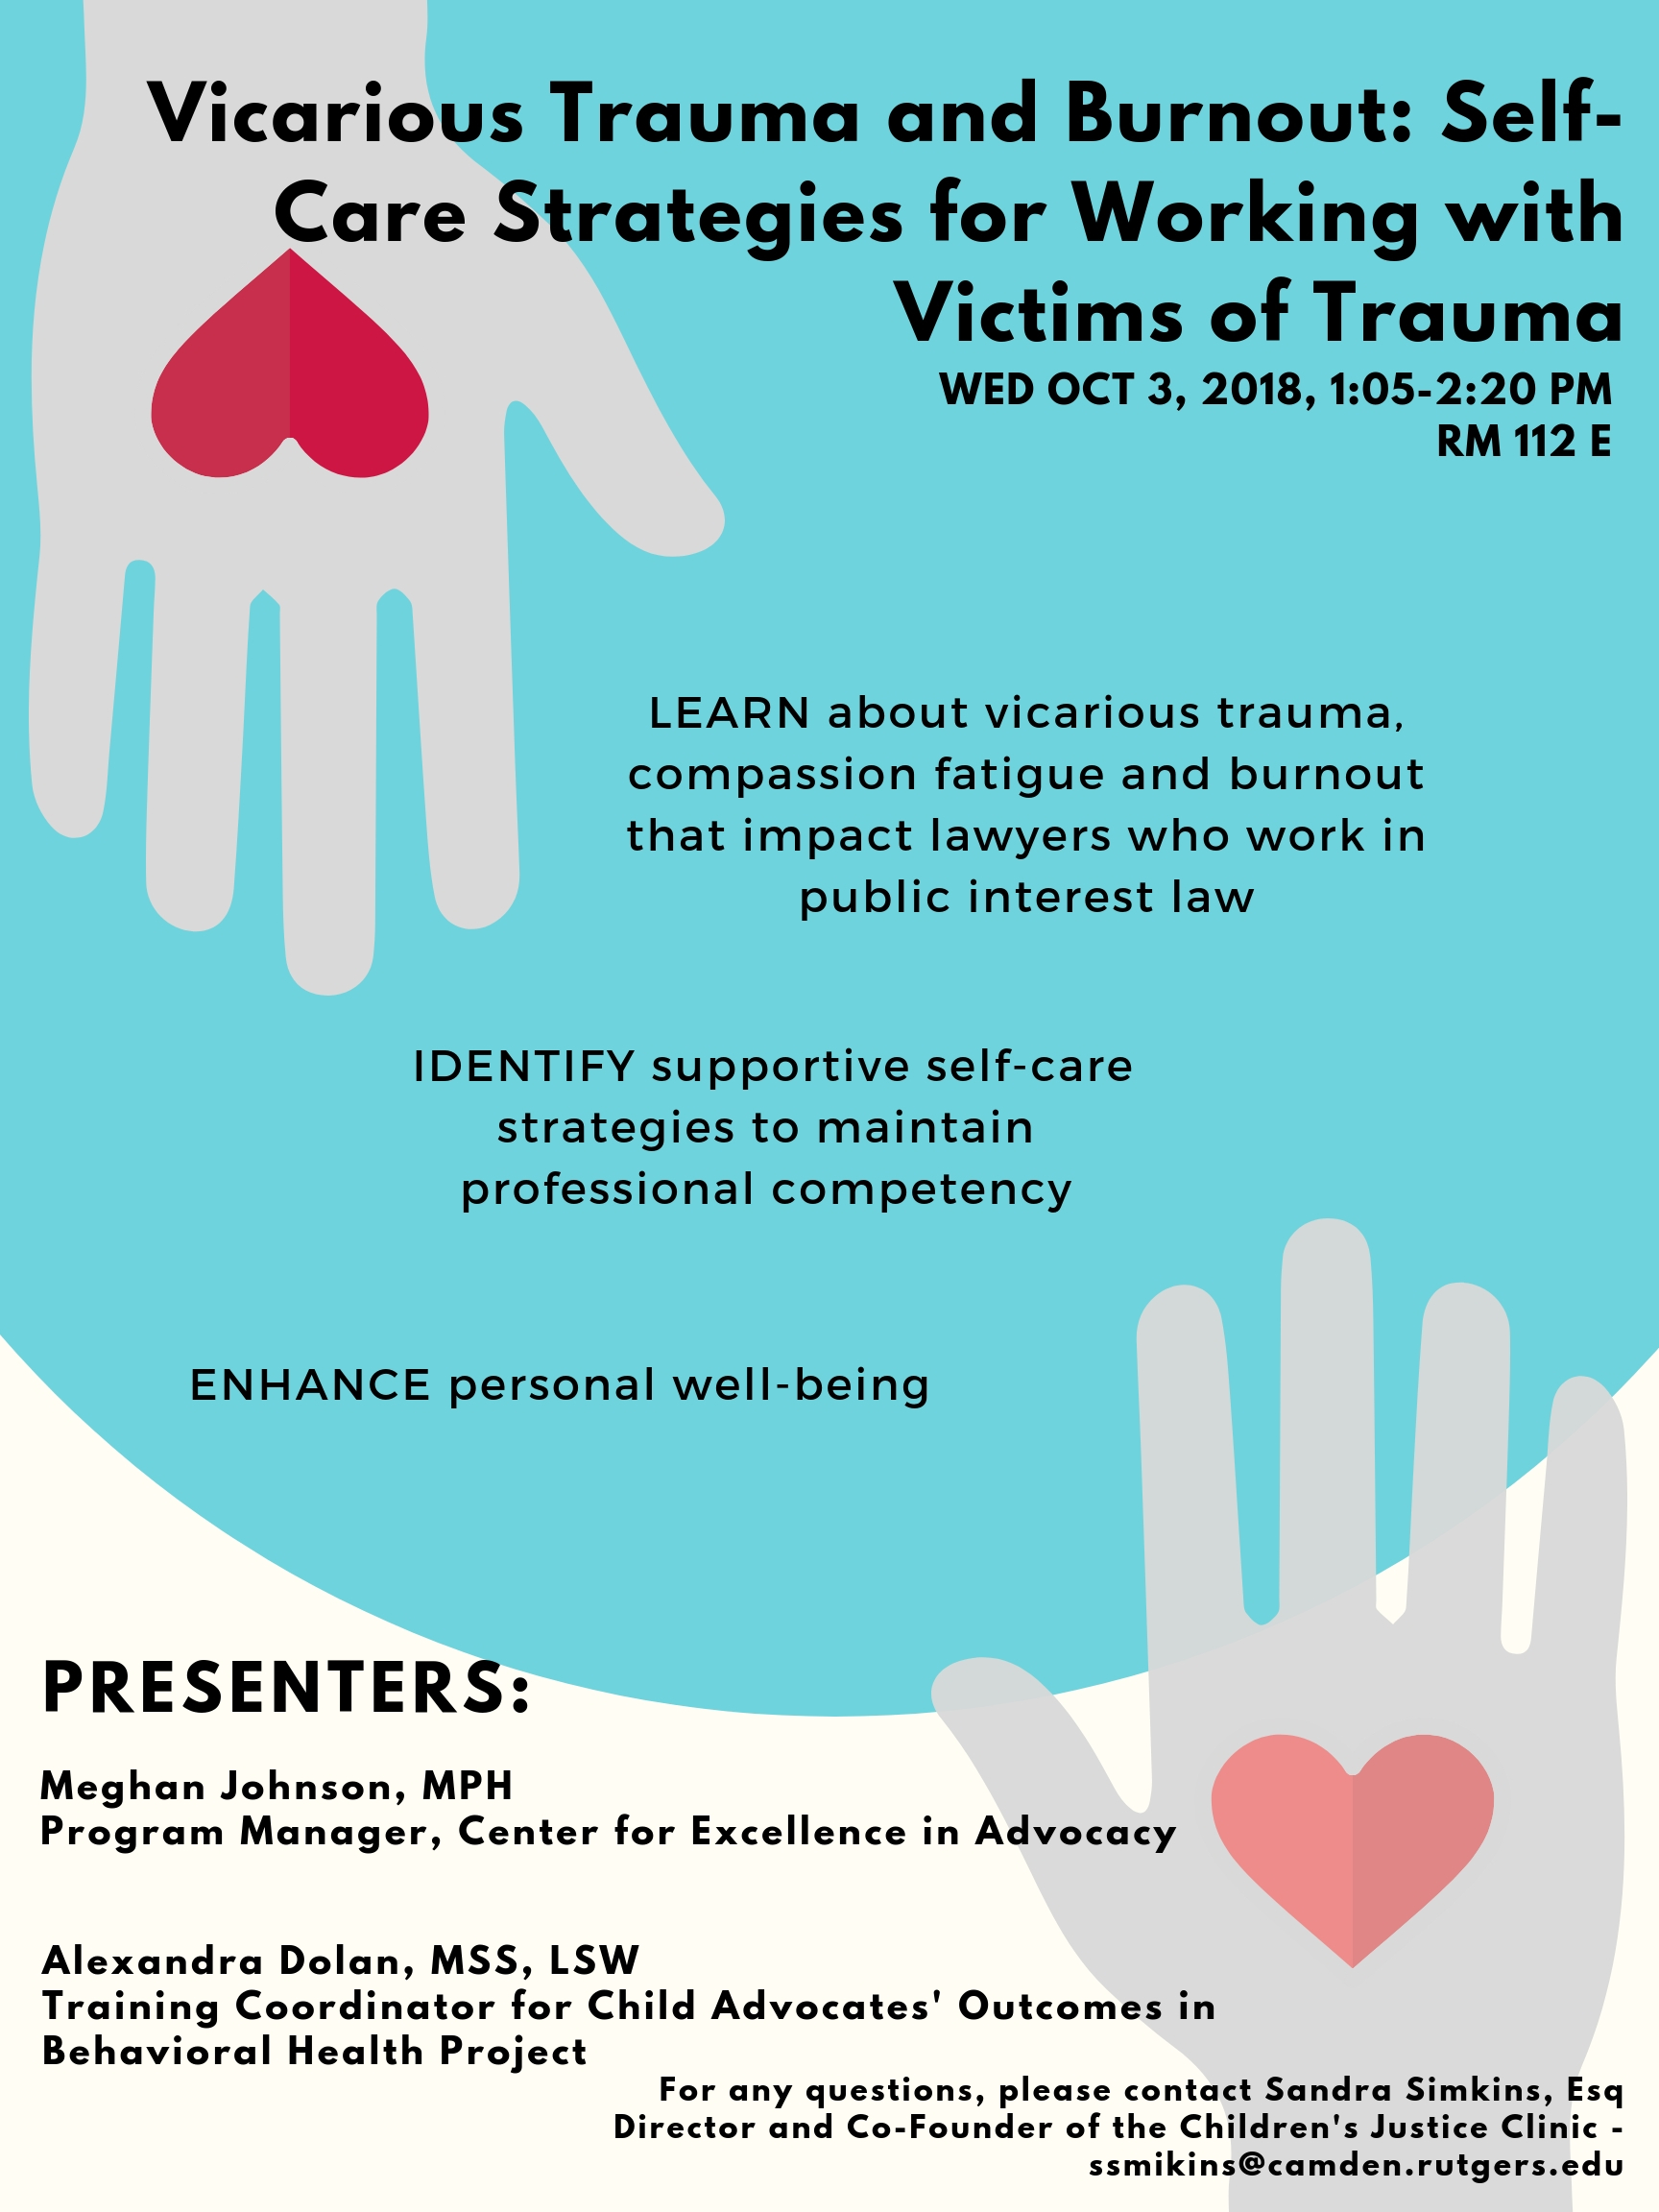 Vicarious Trauma and Burnout: Self-Care Strategies for Working flyer detailing the information on this event page.